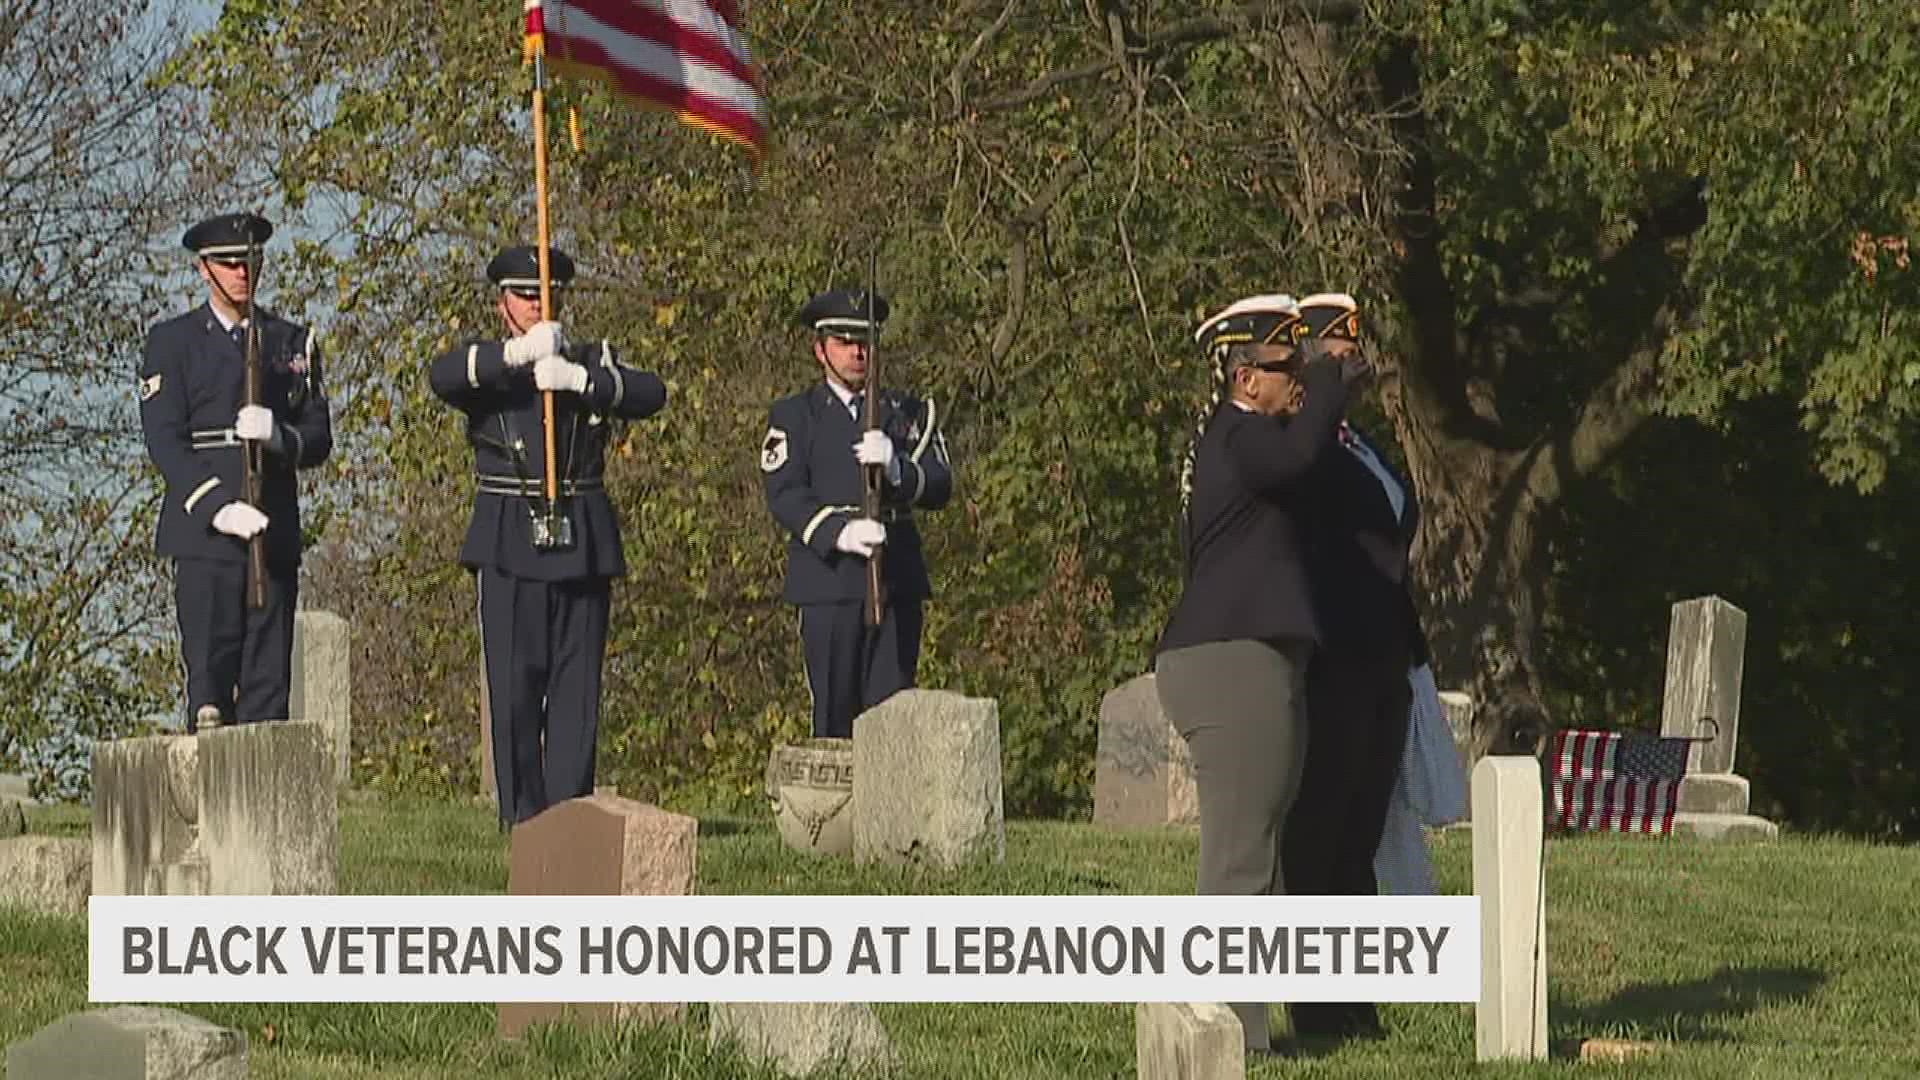 The veterans who fought in World War I, World War II, and Vietnam were given new headstones and proper military honors.